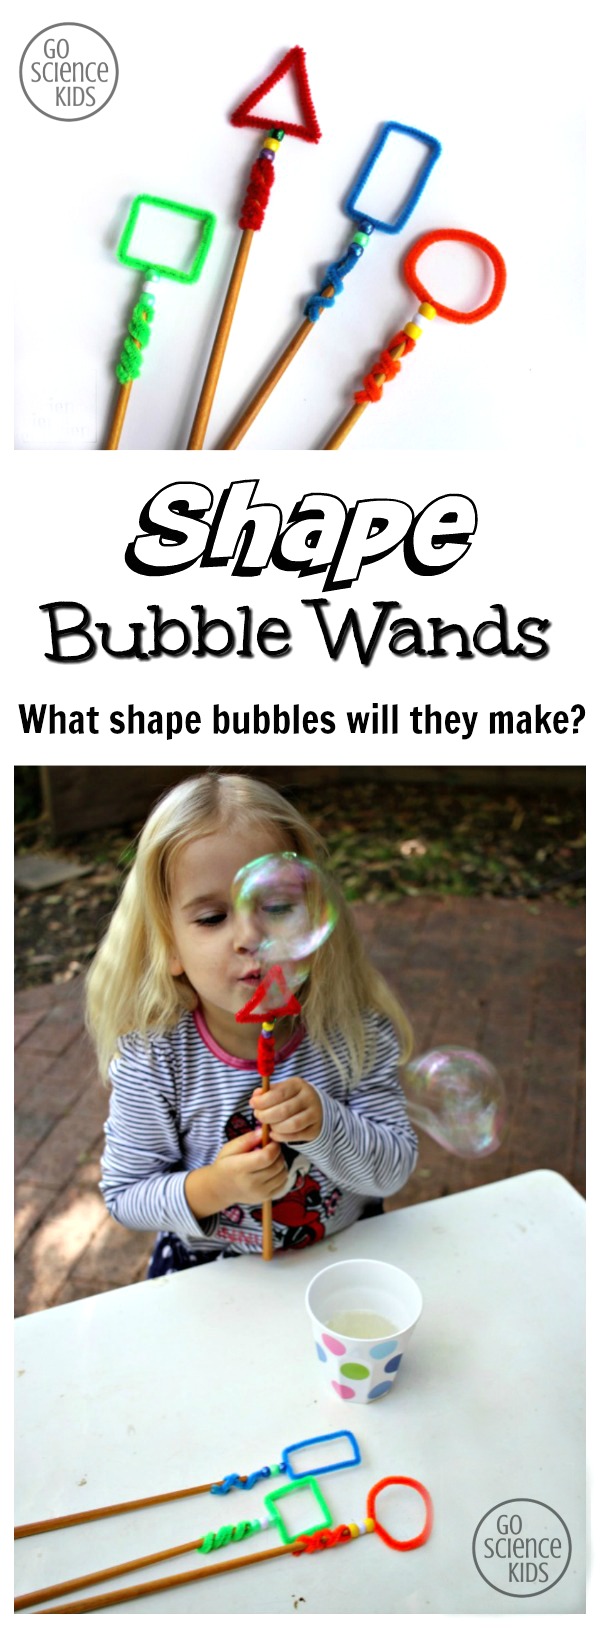 Shape Bubble Wands - what size bubbles will they make